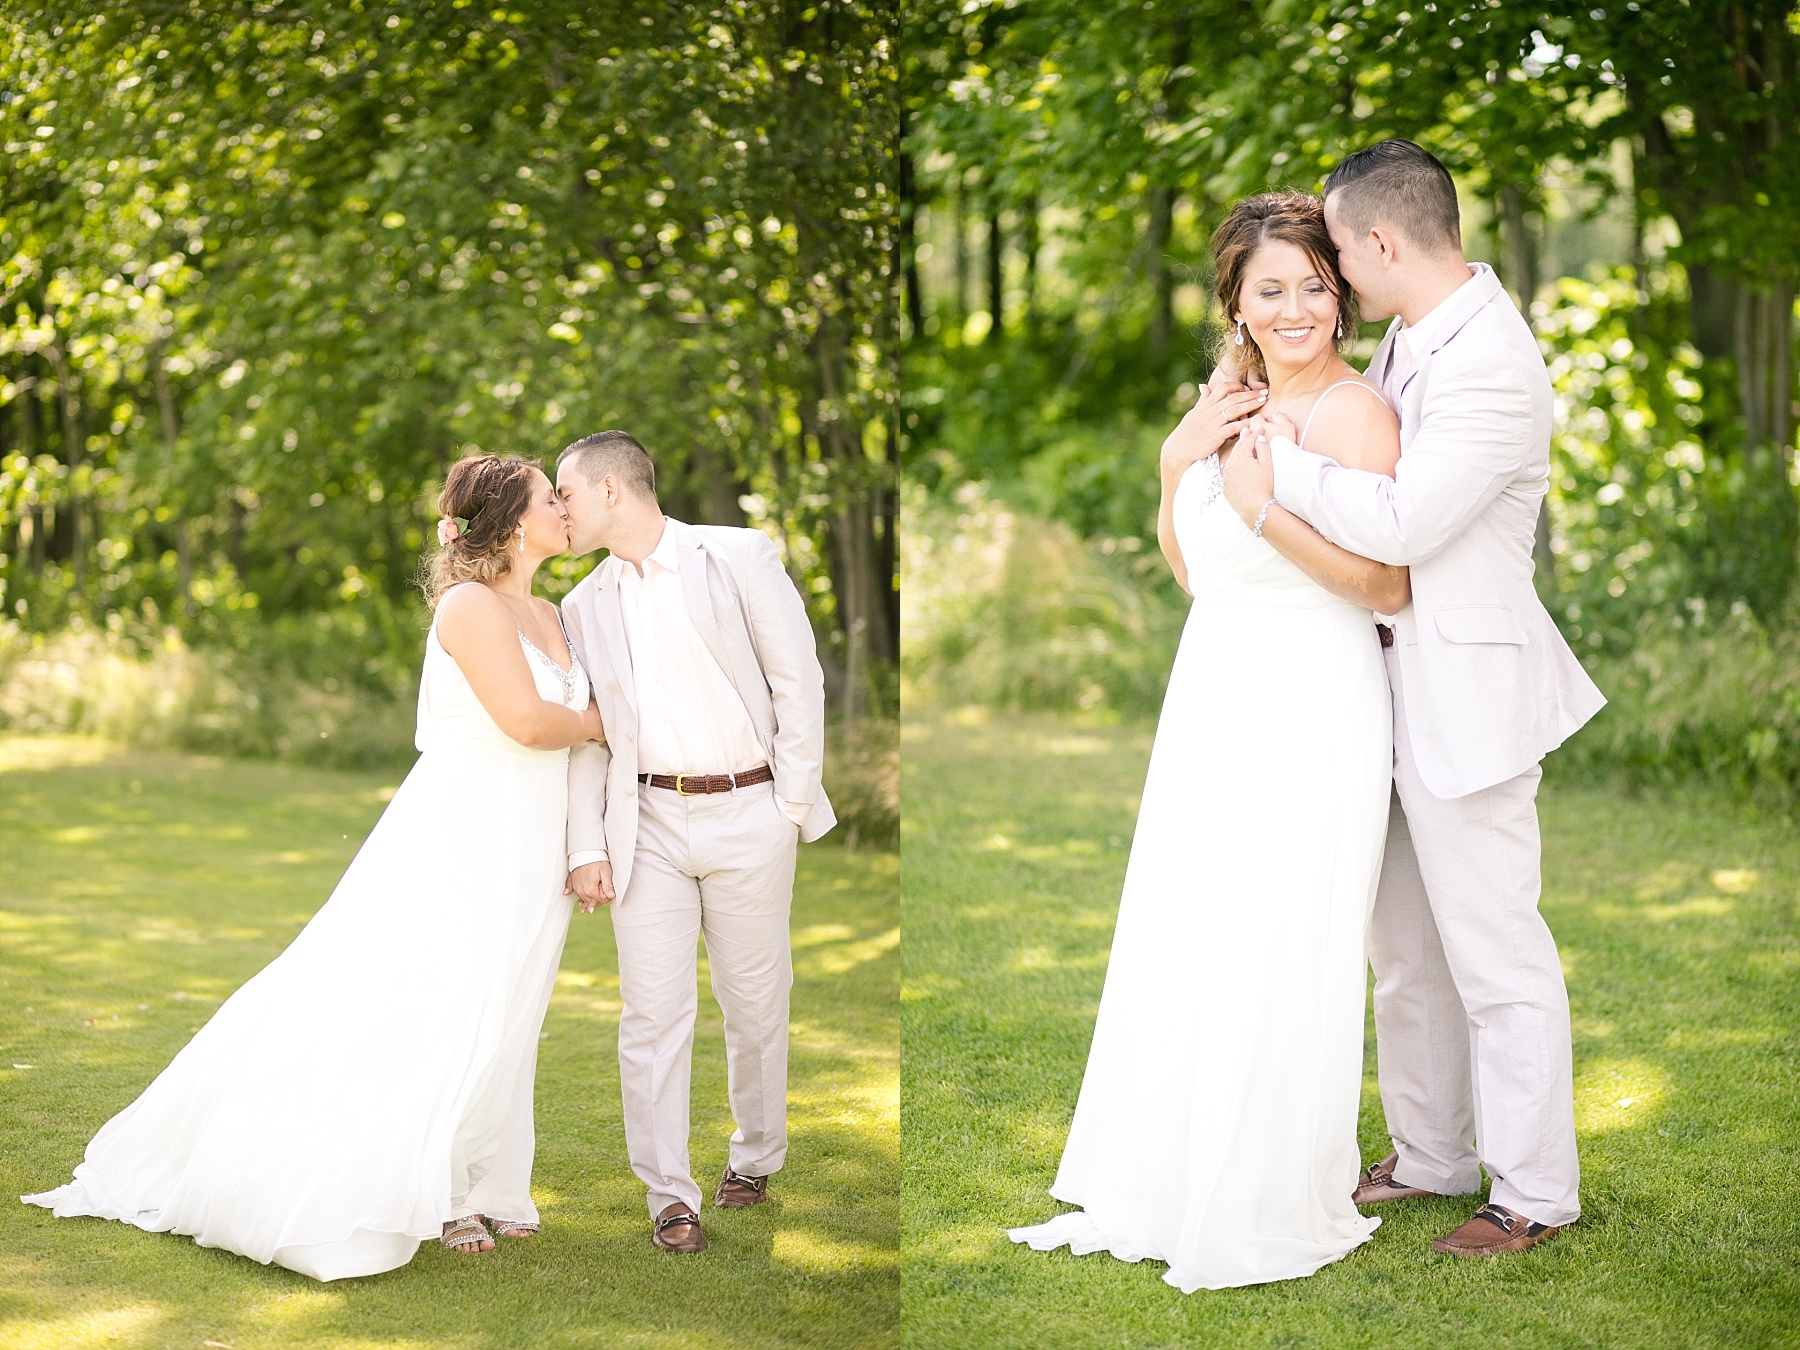 Married in the Virigin Islands, Alaina and Jacob greeted their guests and danced the night away at The Barn on Stoney Hill for their reception.